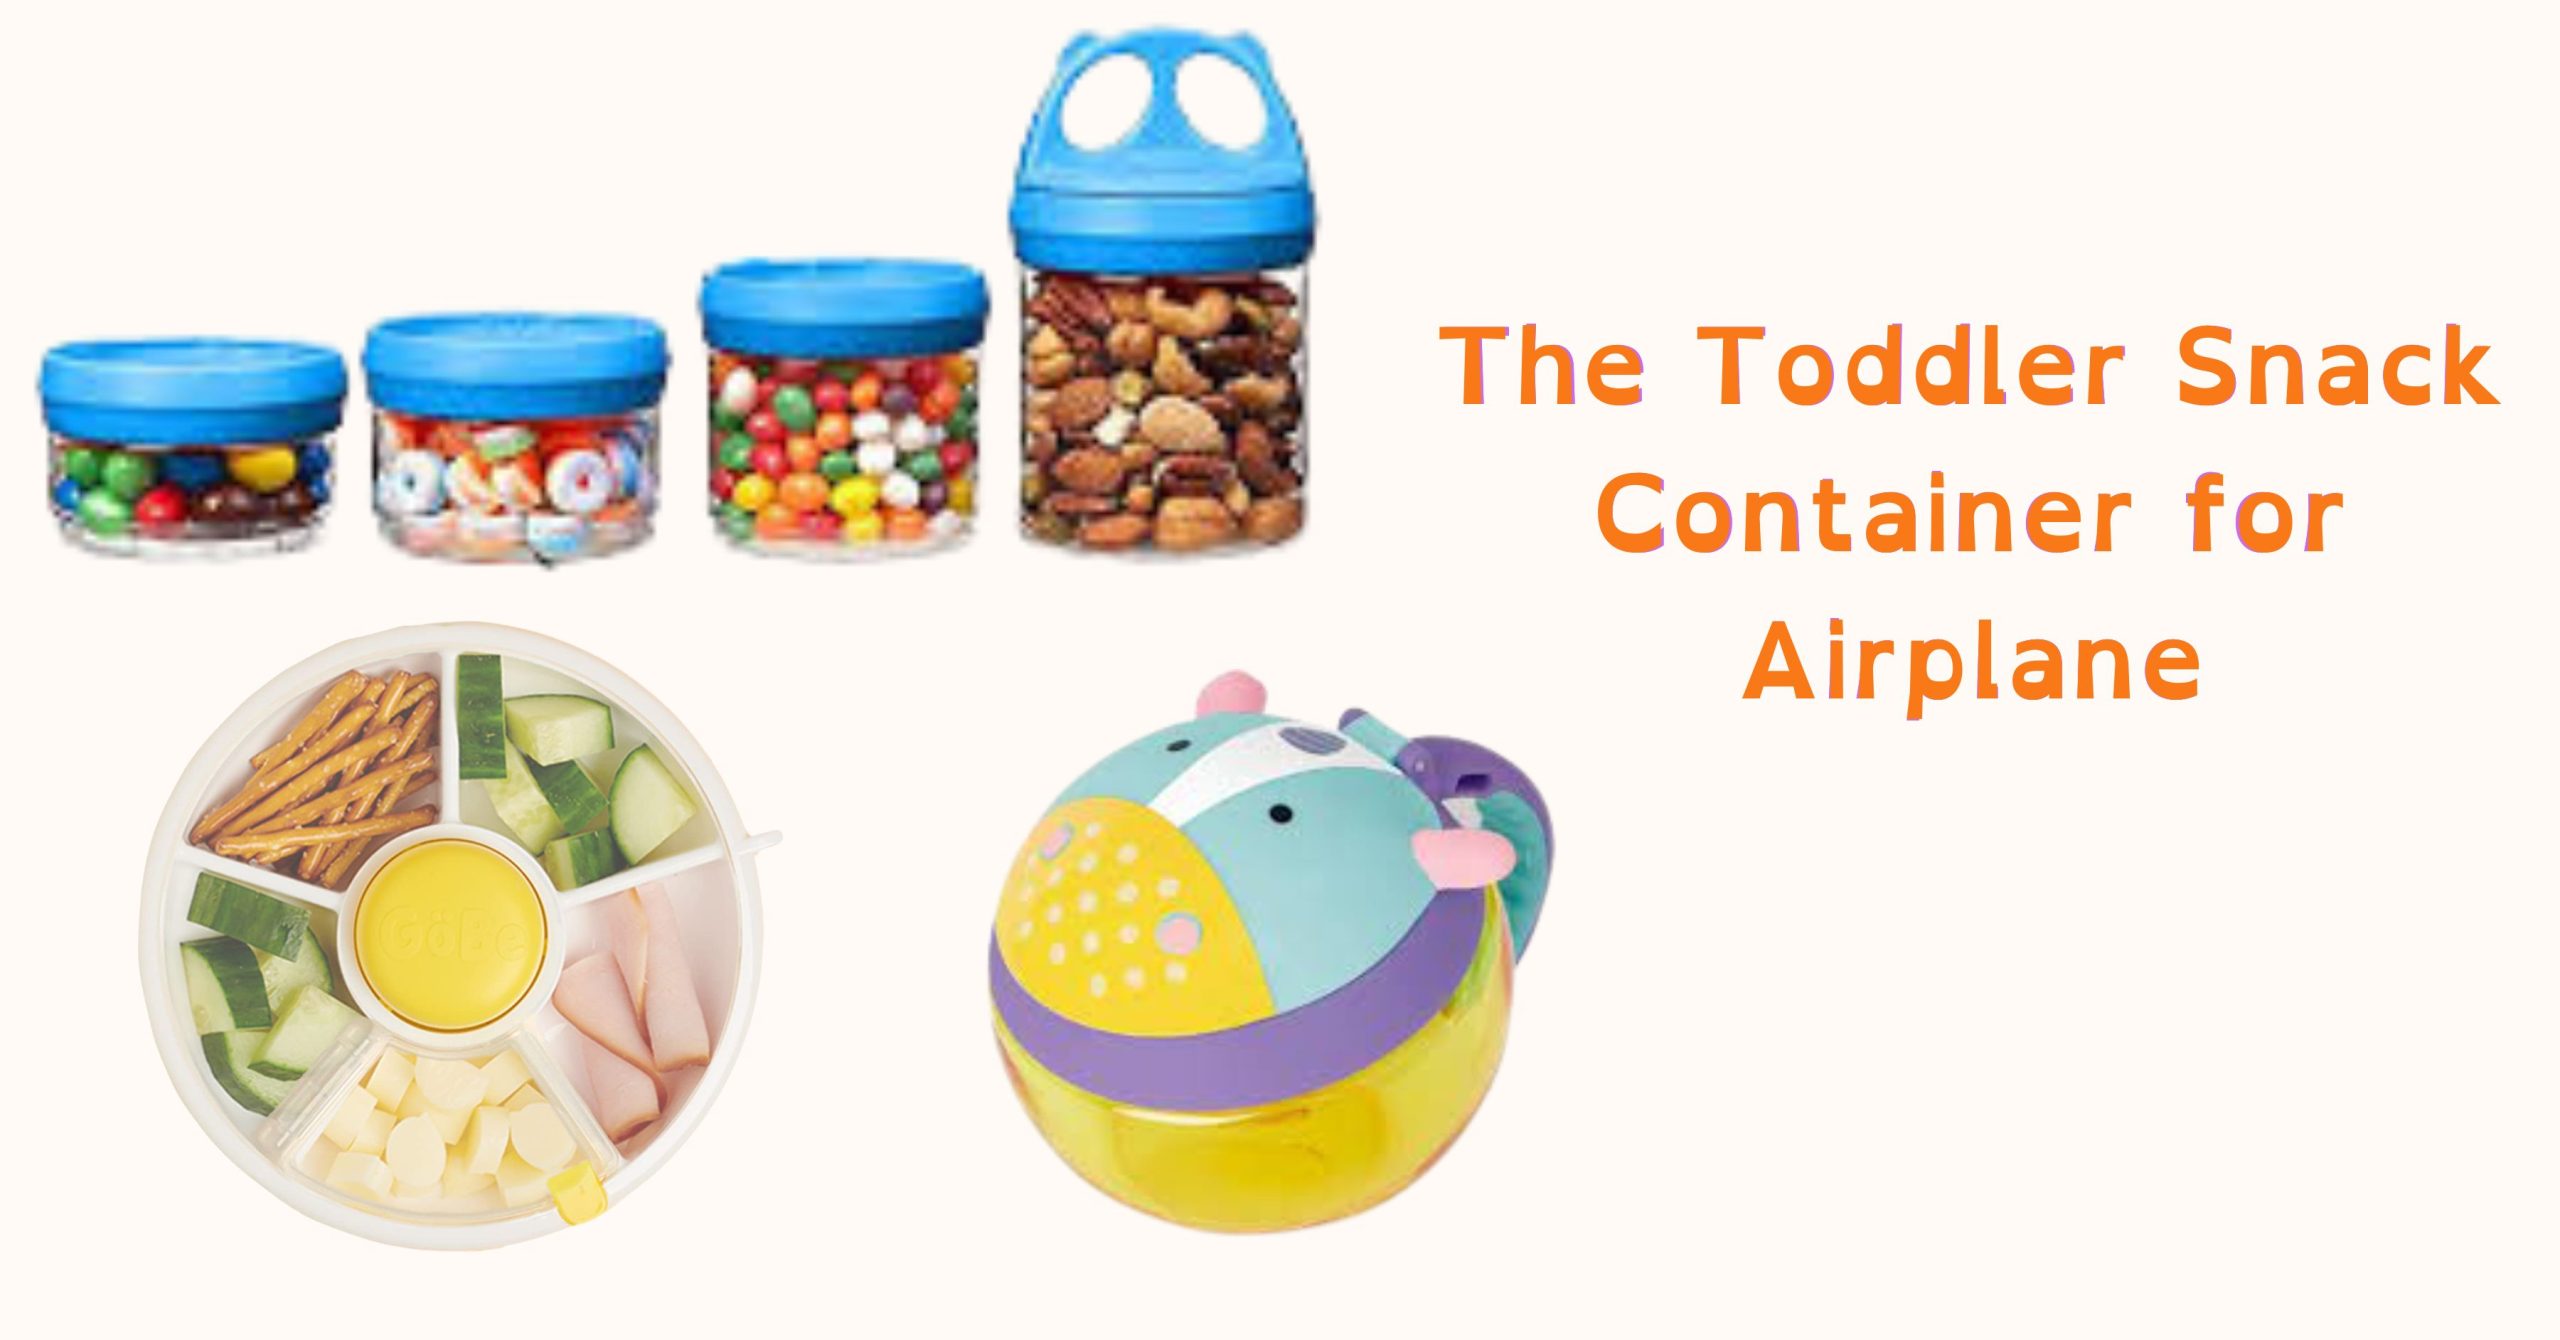 The Best Toddler Snack Container for airplane